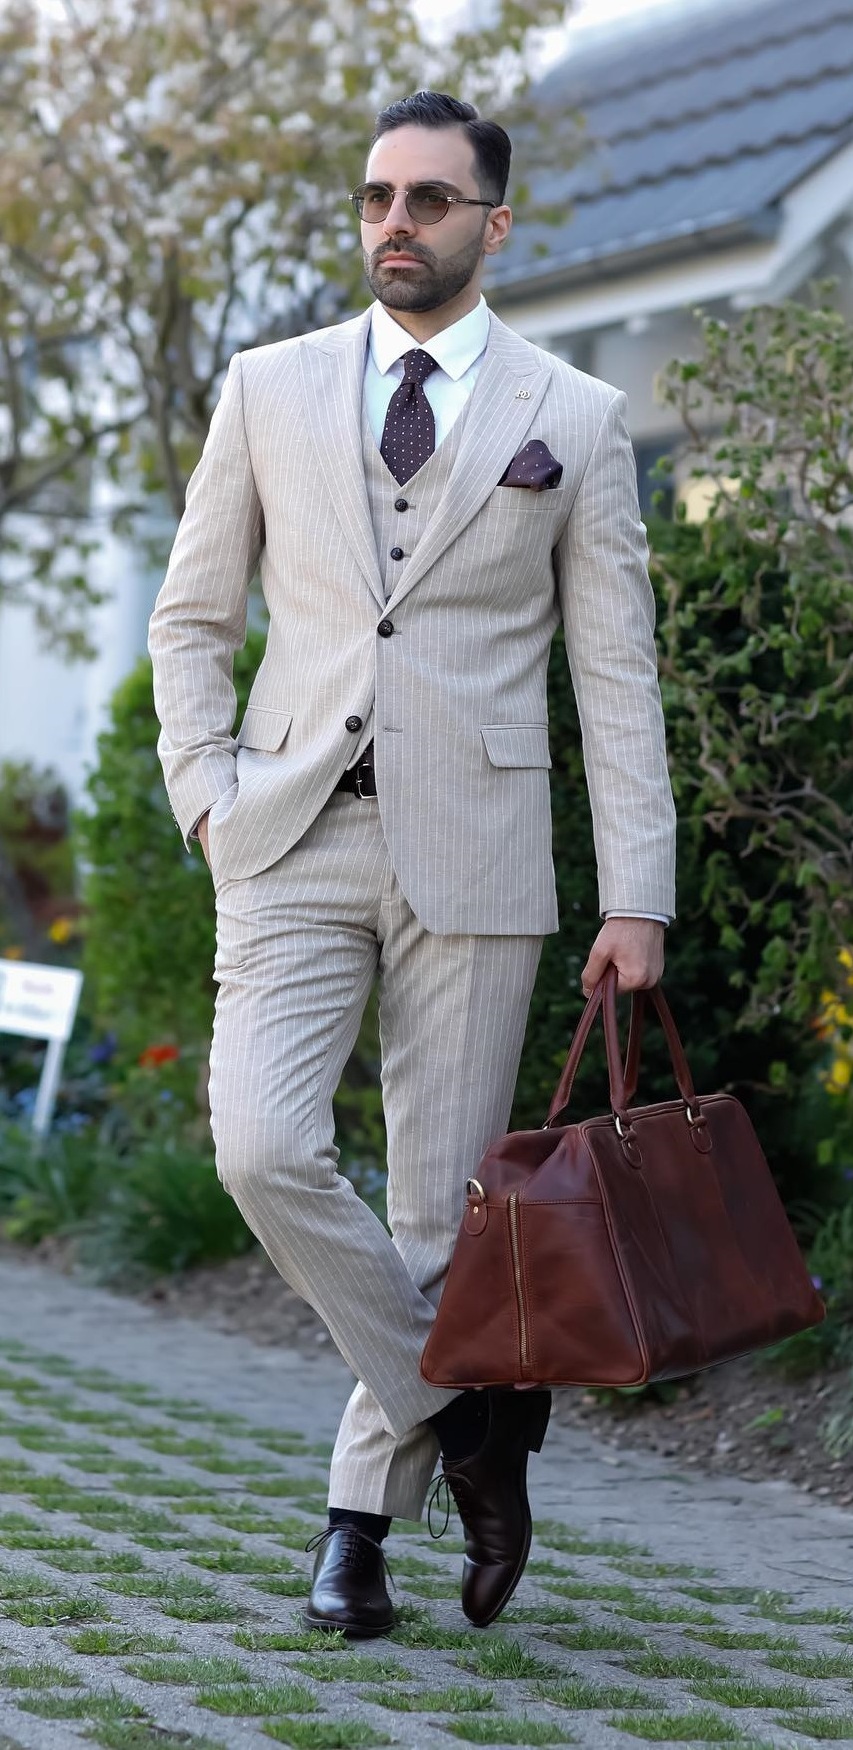 Two Buttoned Suit Look for Men